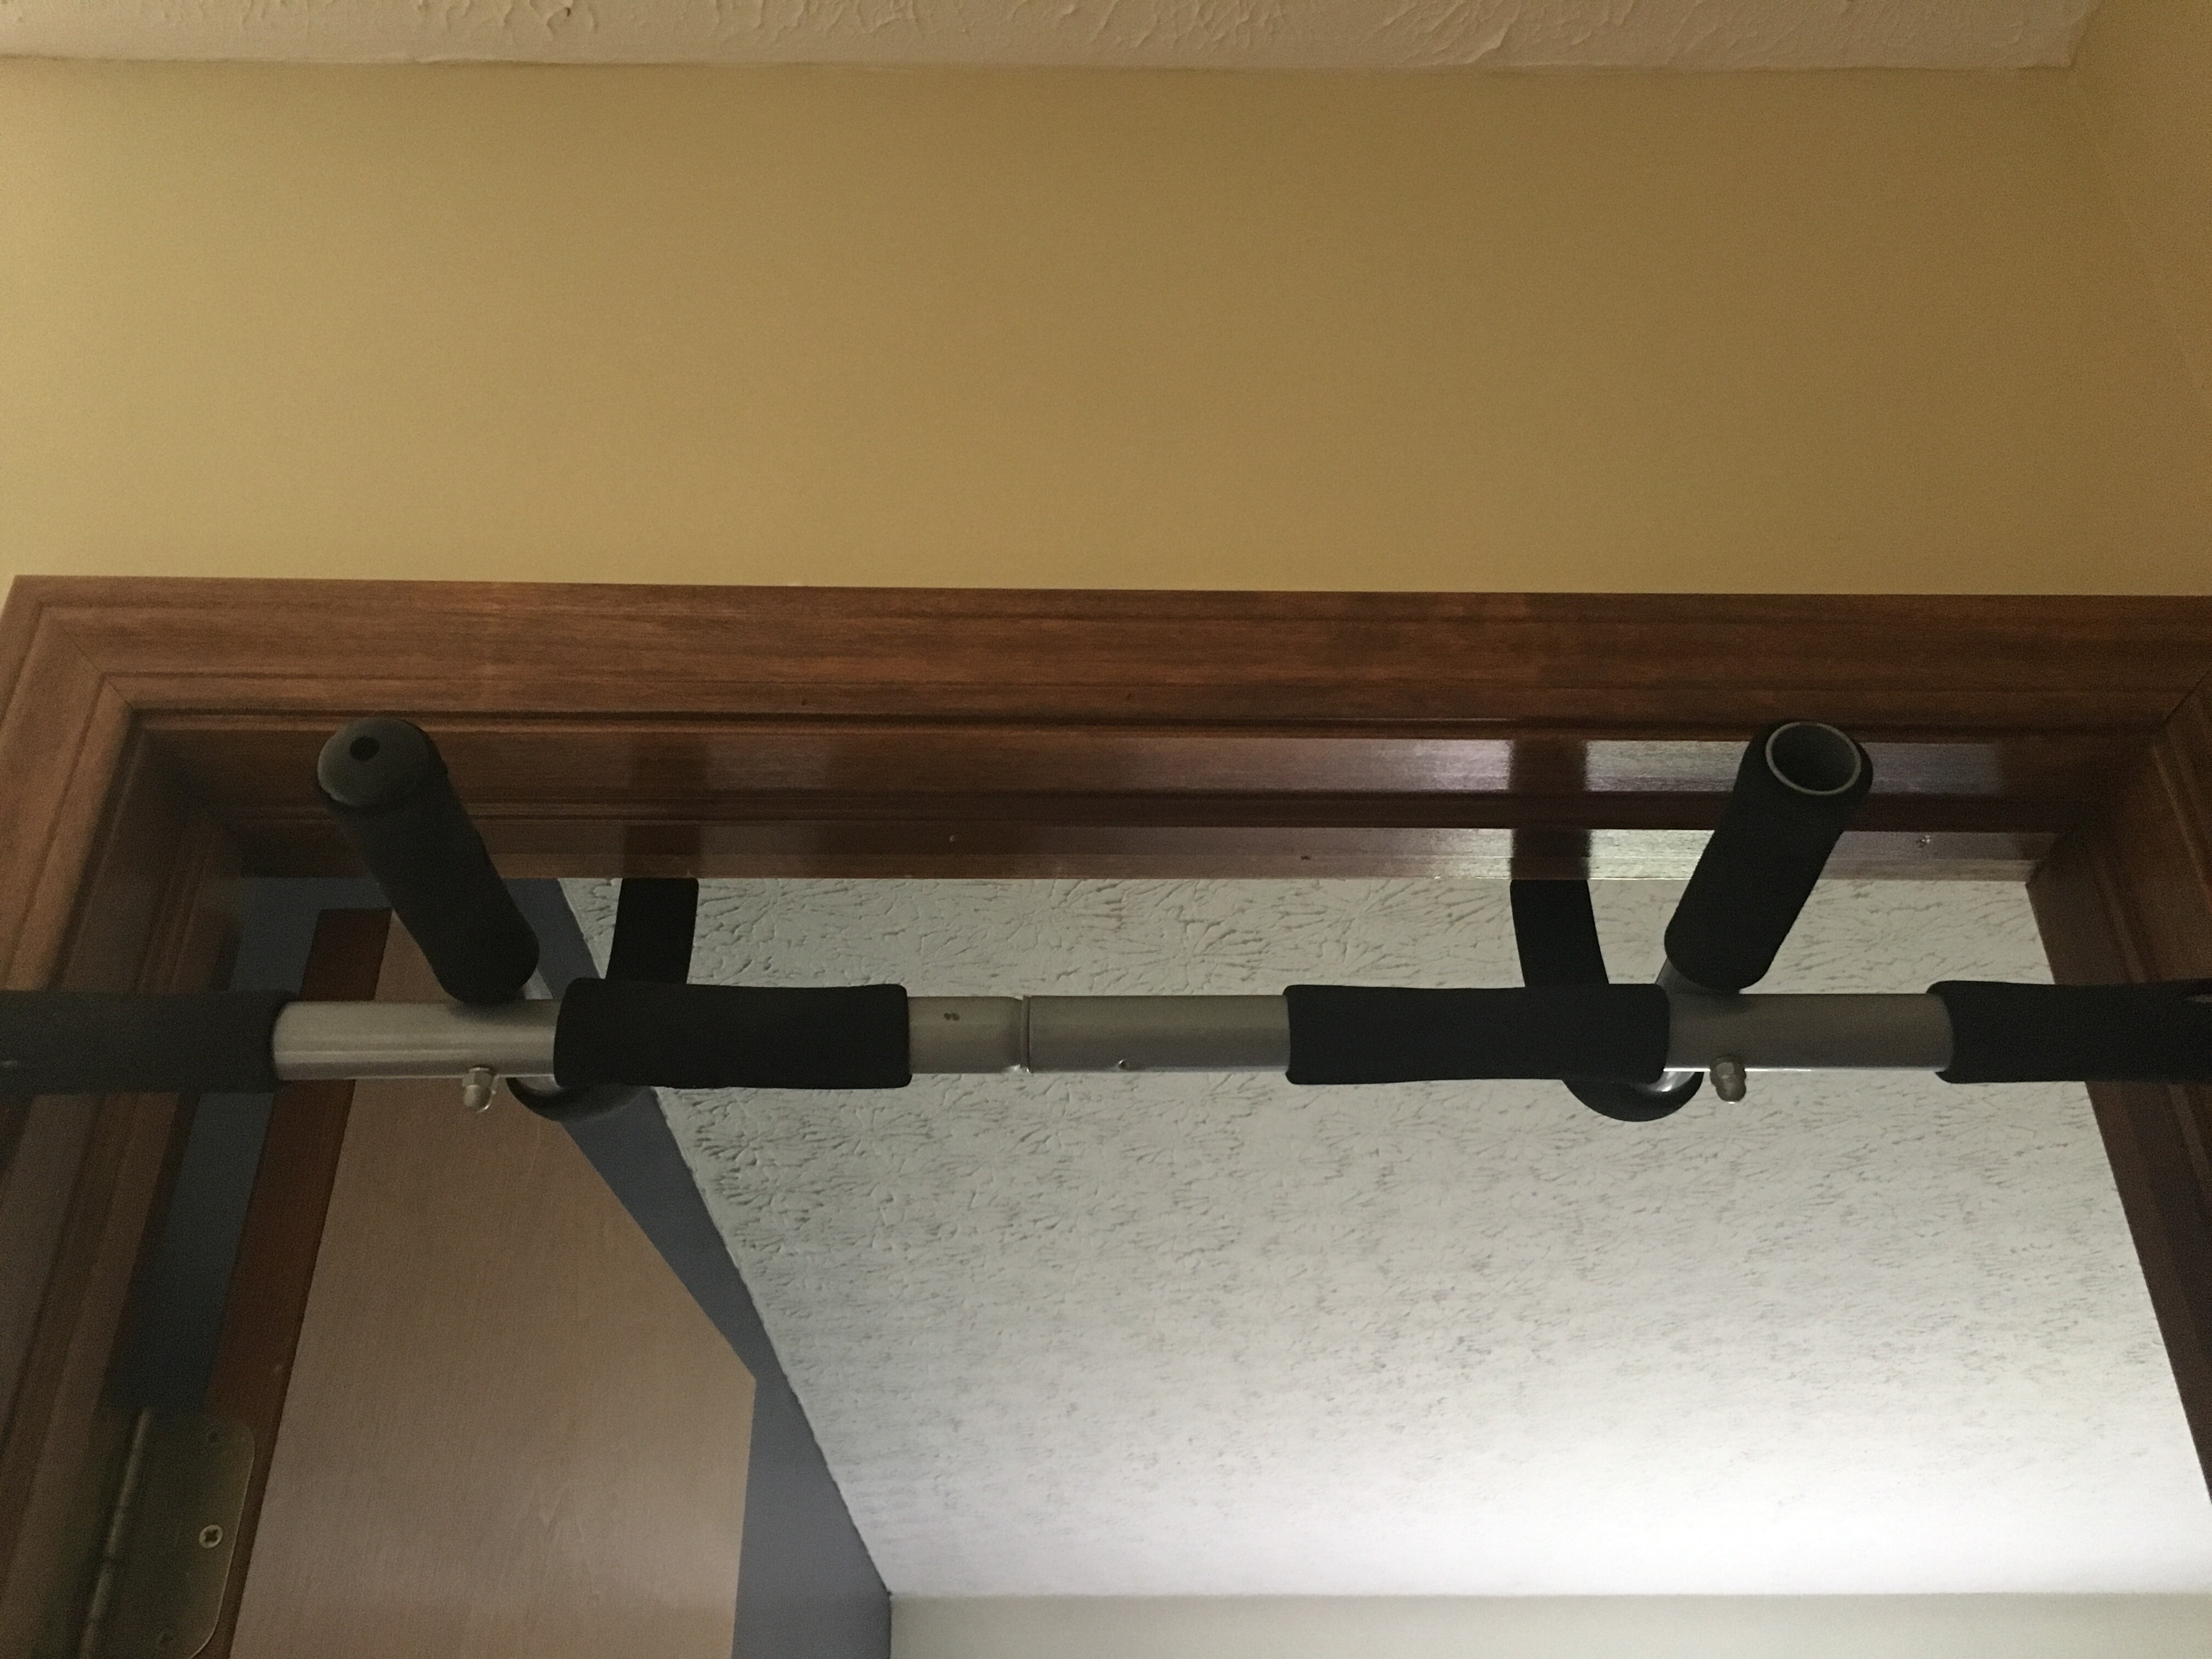 Iron gym workout bar in the pull-up position